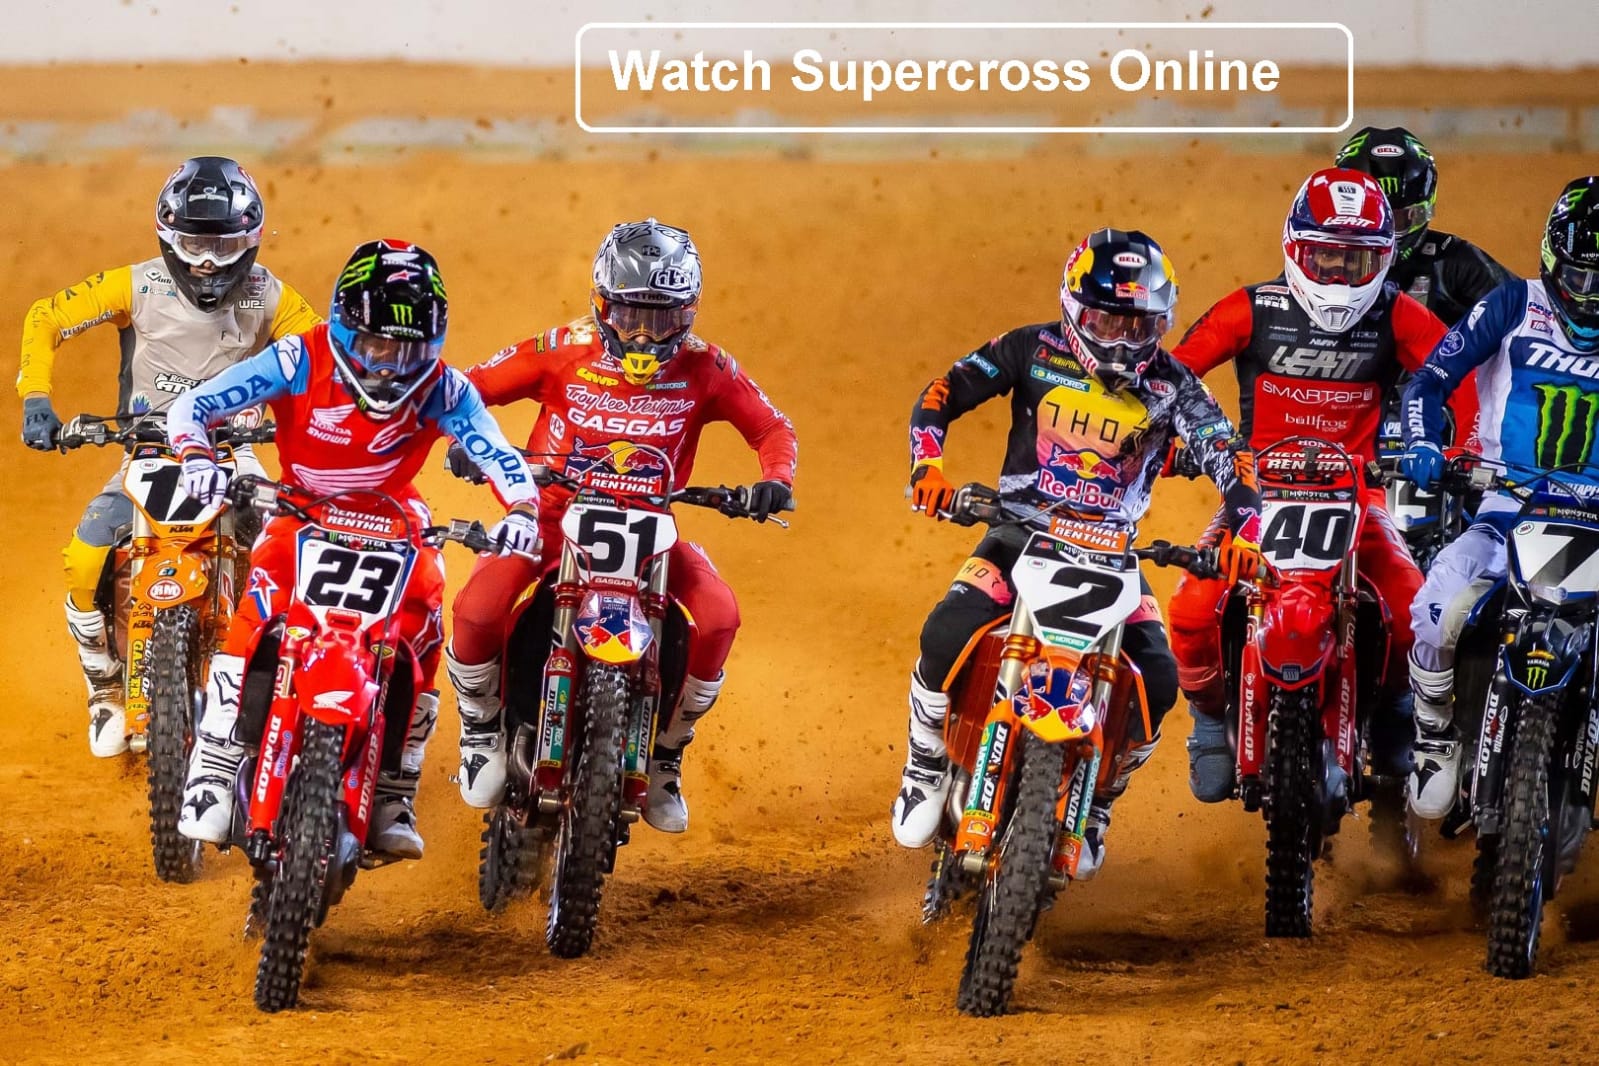 Supercross Live Stream! How to Watch AMA Supercross 2022 Online VIDEO